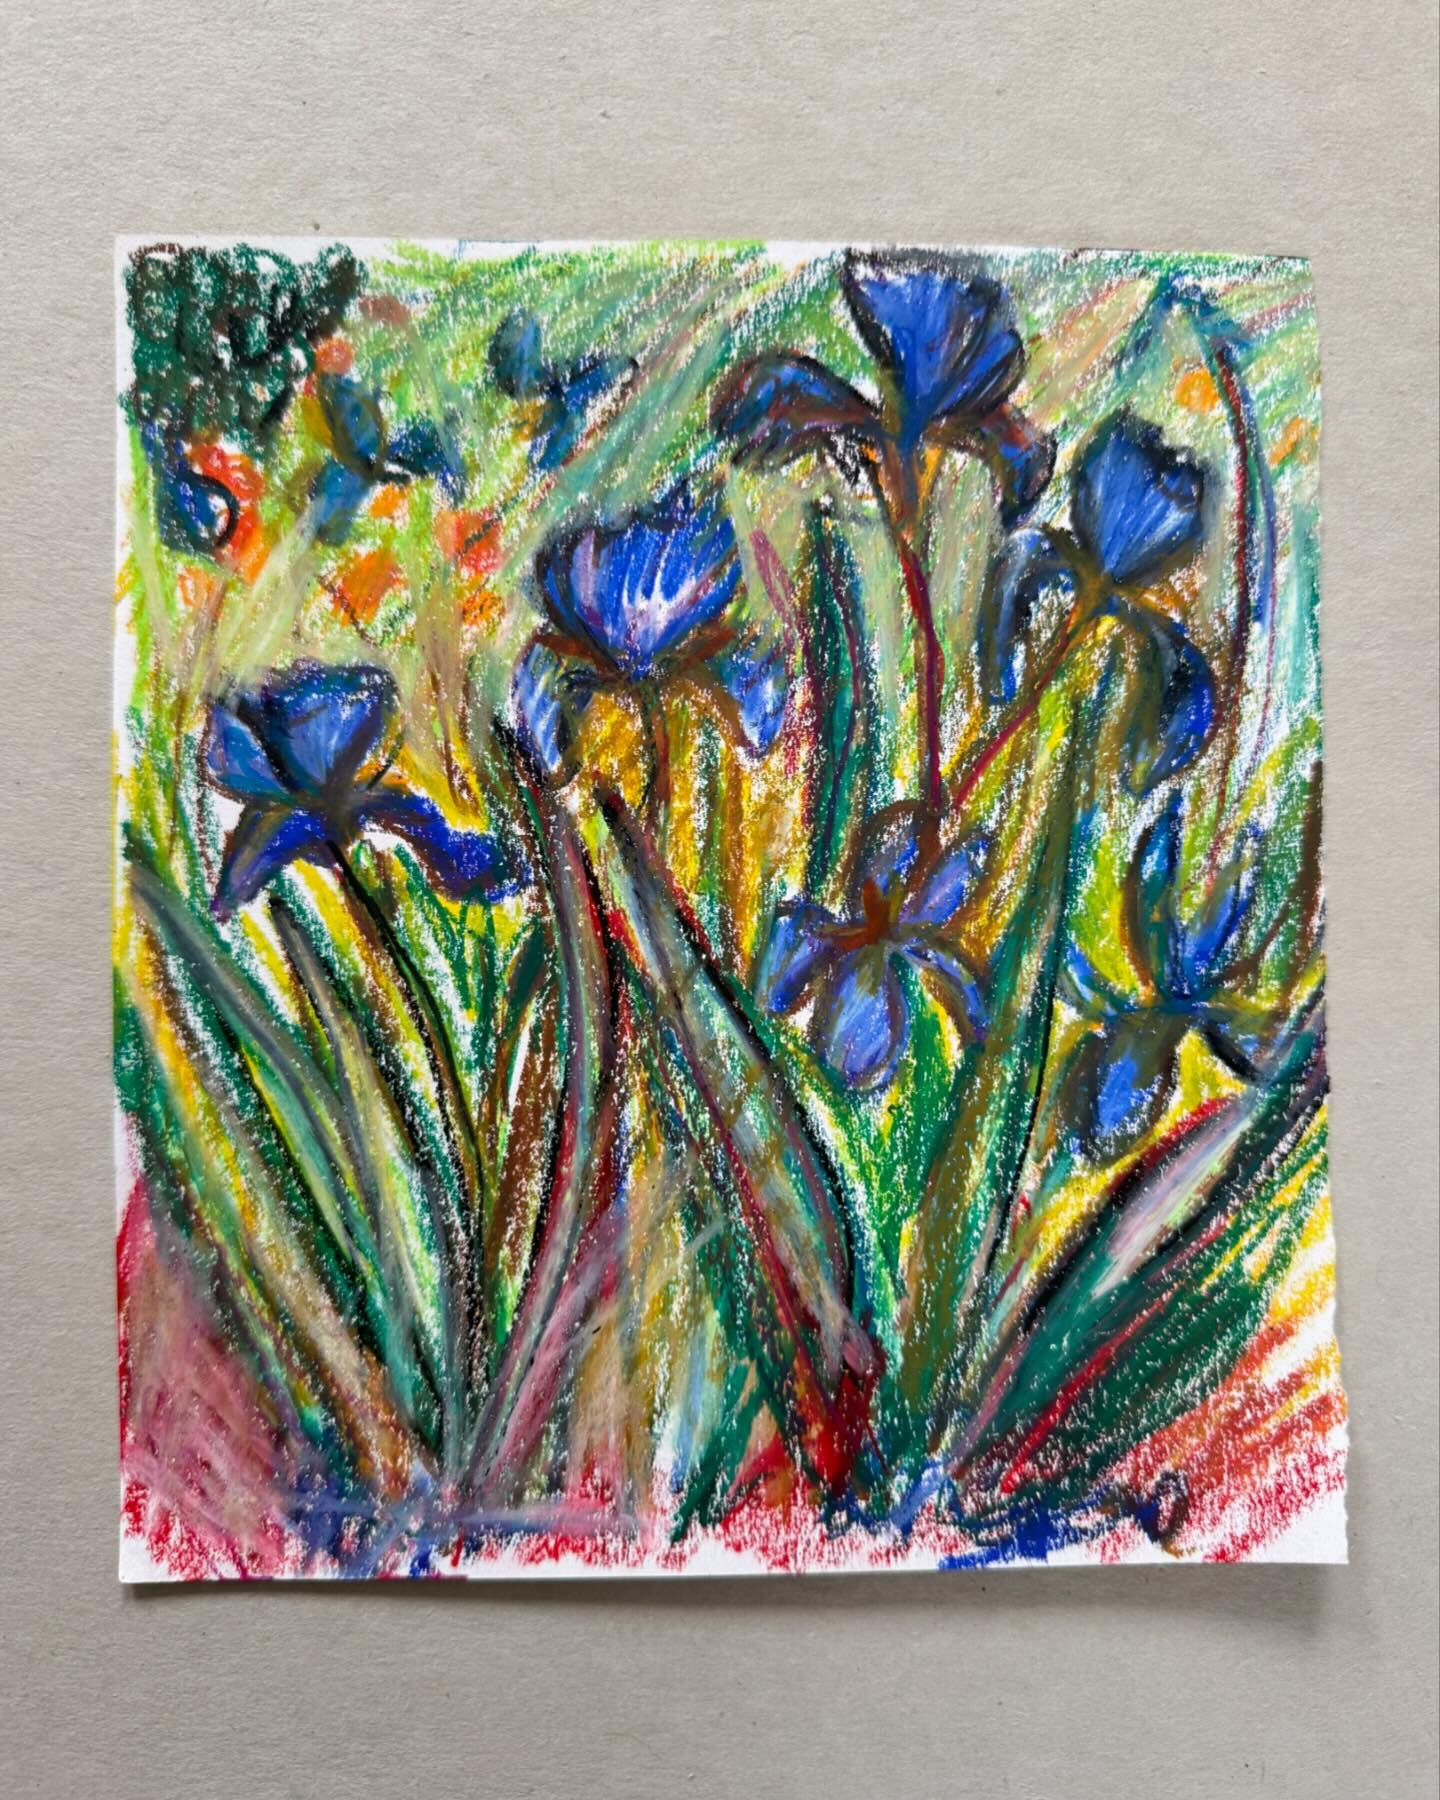 Thinking of a very special little girl today. The Irises by Van Gogh is an image I come back to time and time again. There is so much emotion in the colours and the swaying of these majestic plants. A reproduction is always a good place to start if y